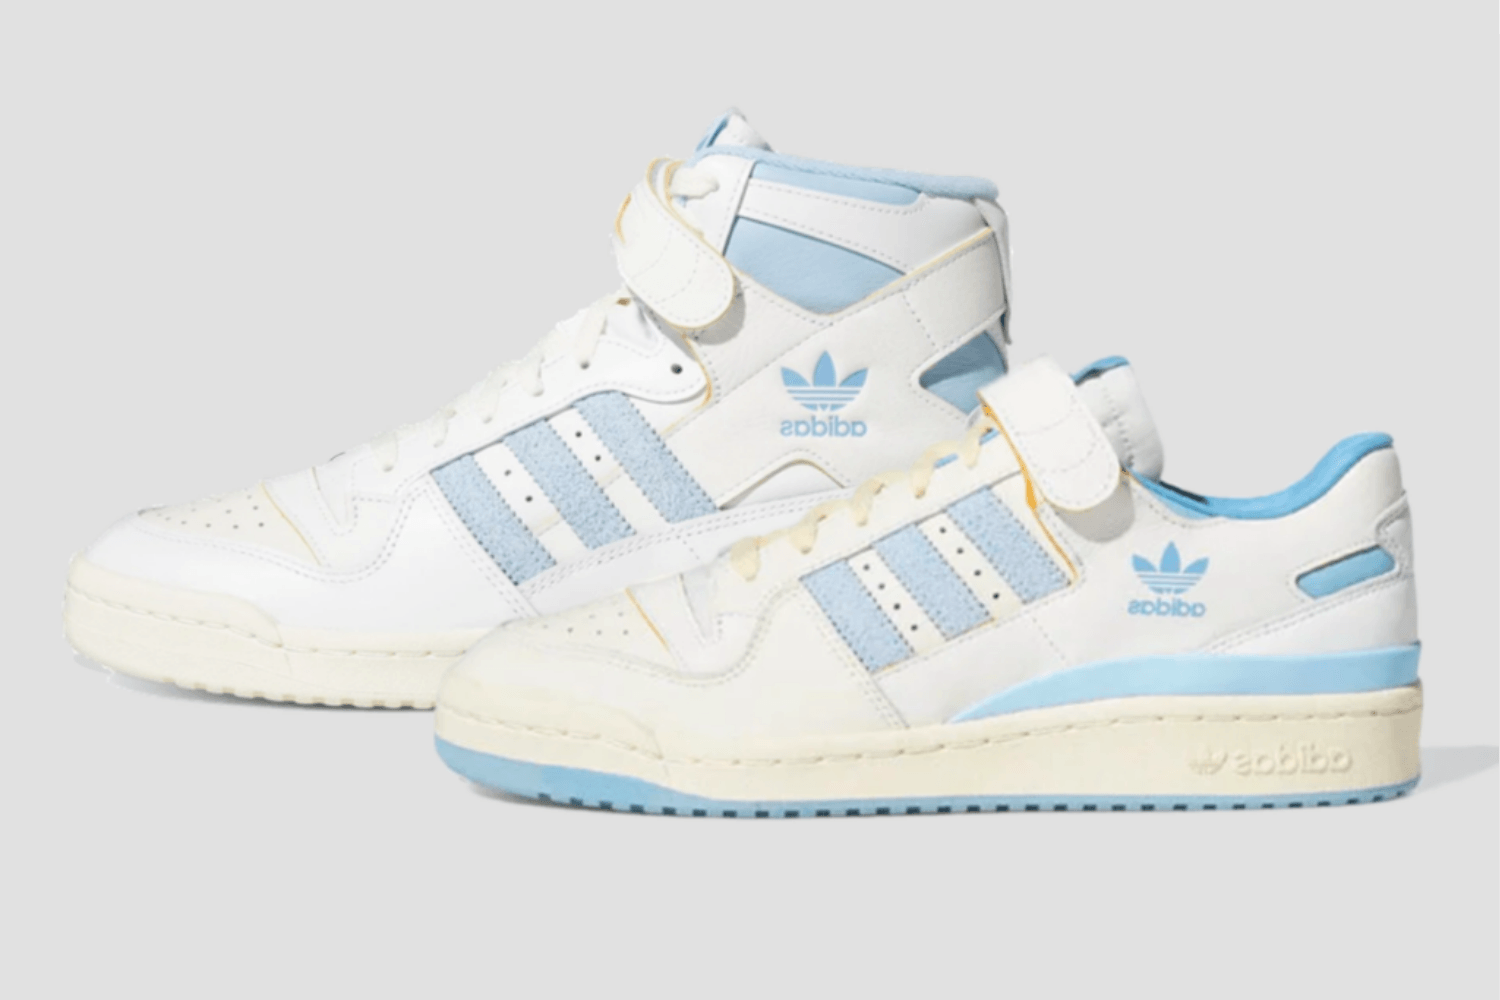 The 'Carolina Blue' colorway comes to the adidas Forum